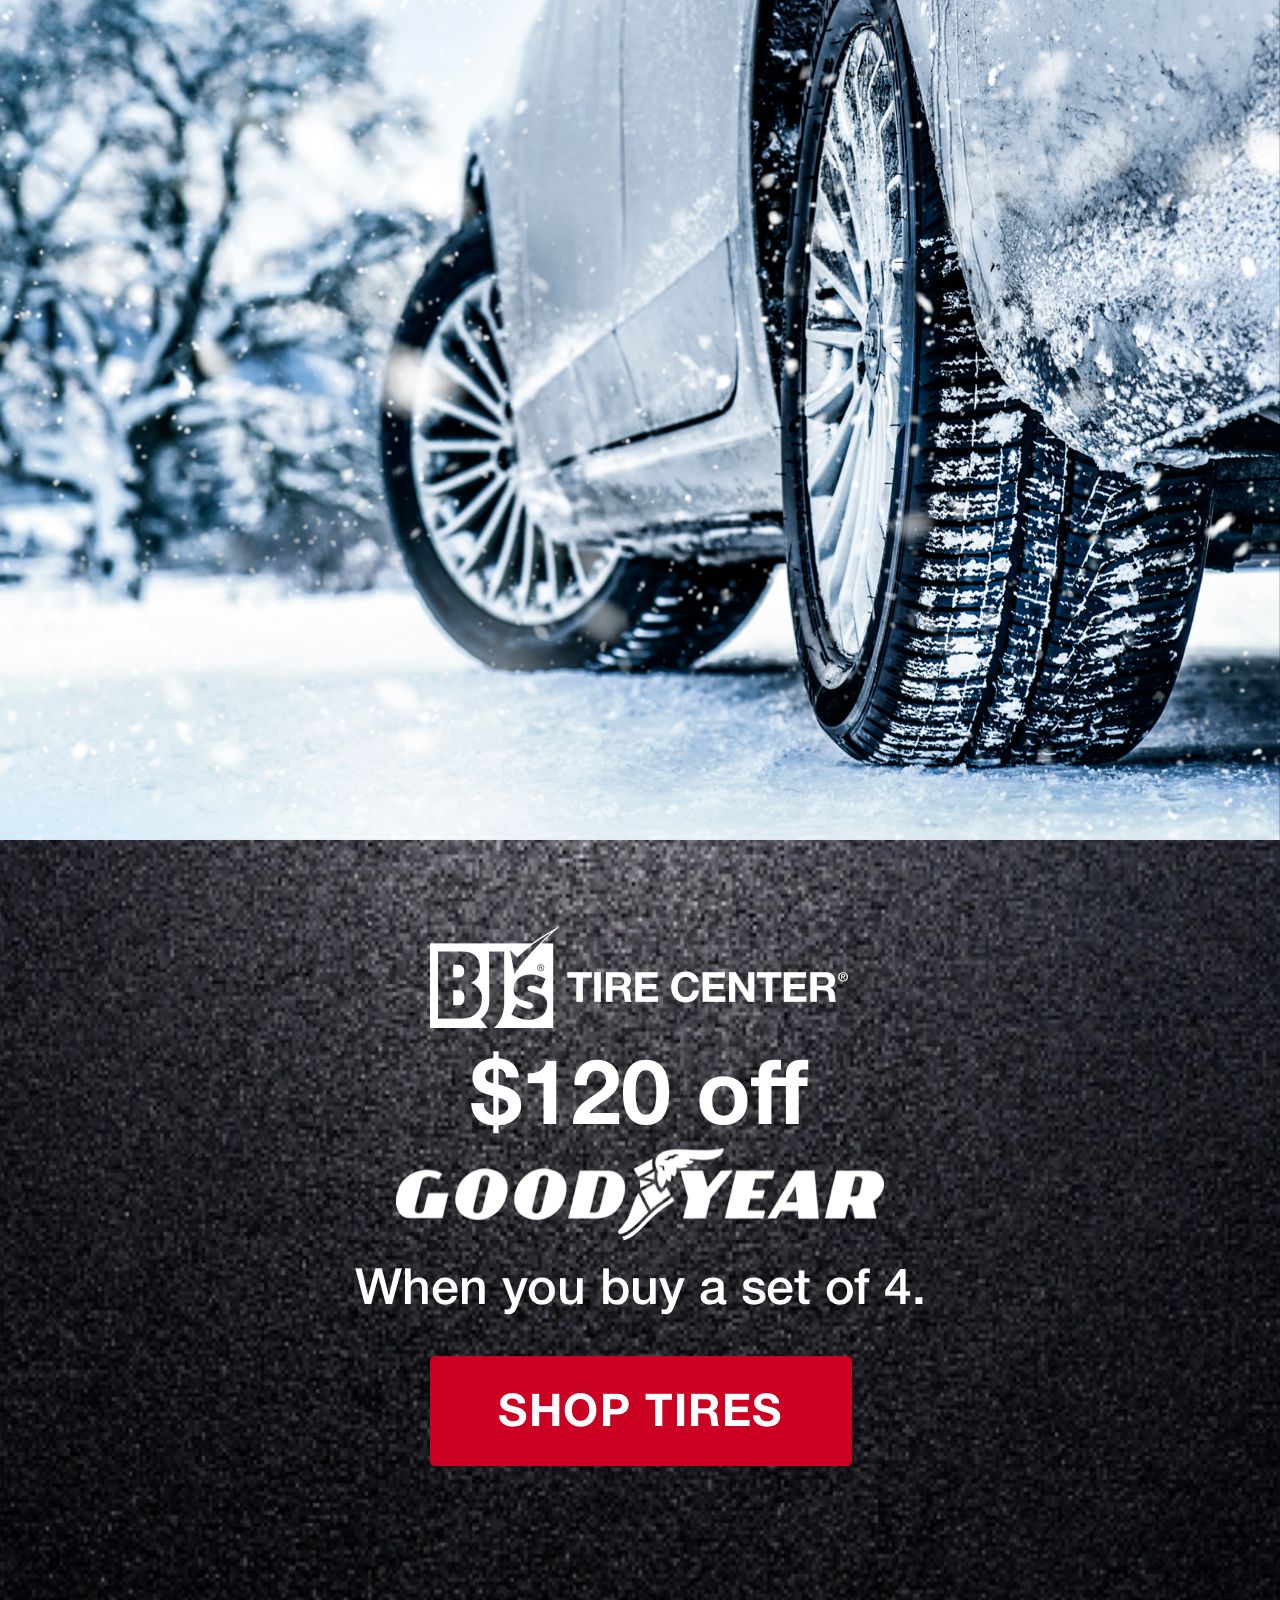 BJs Tire Center. $120 off Goodyear when you buy a set of 4. Click here to shop tires